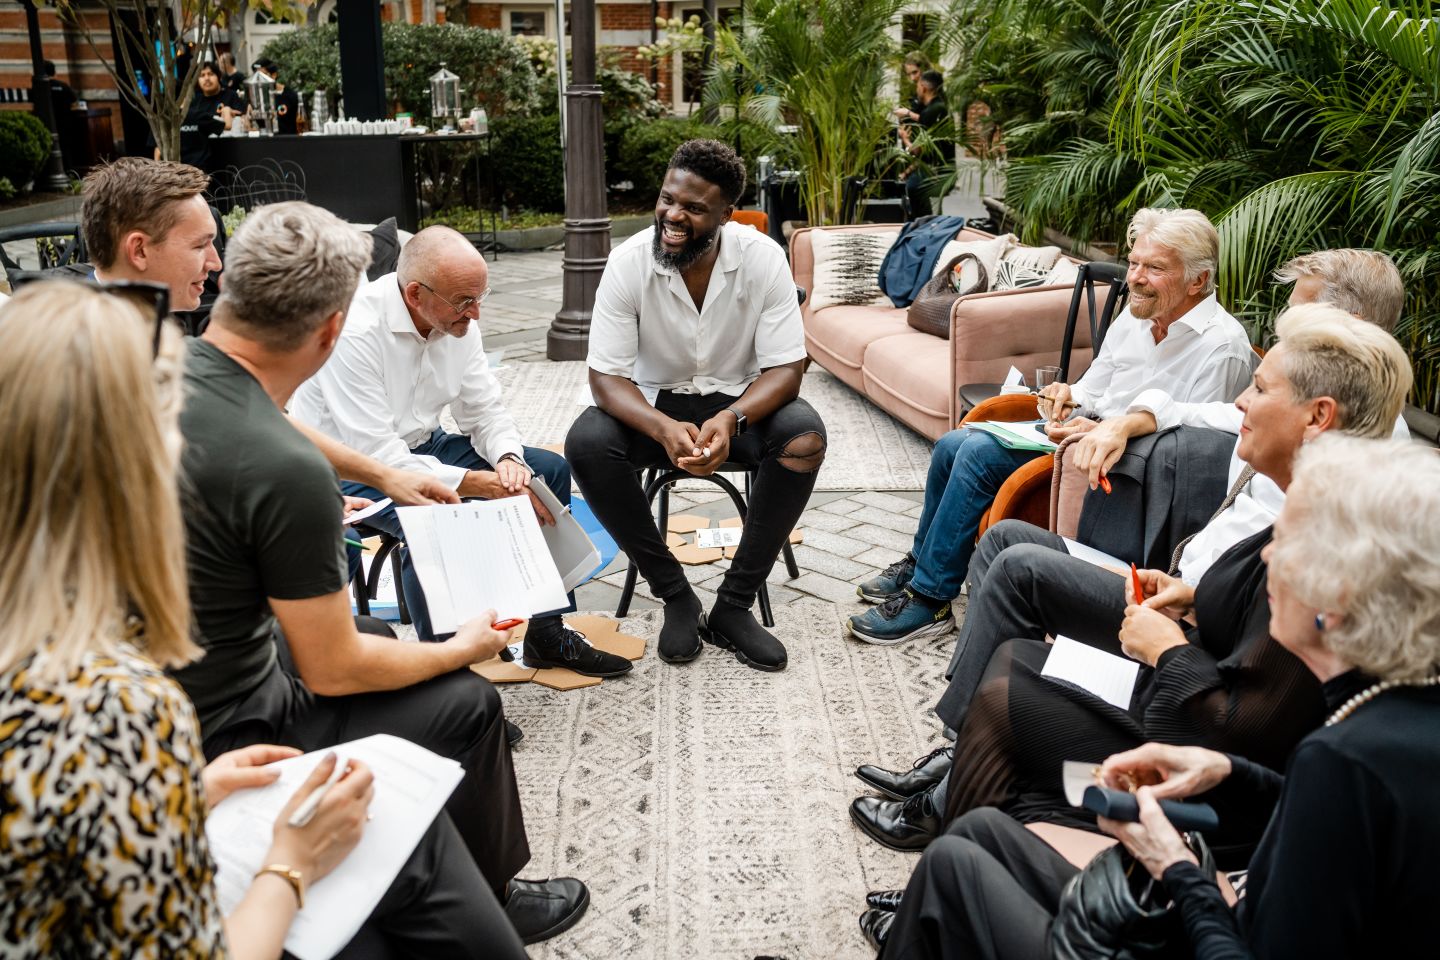 Richard Branson sits with The B Team, young leaders, Karl Lokko, Halla Tomasdottir, Mary Robinson and others in New York